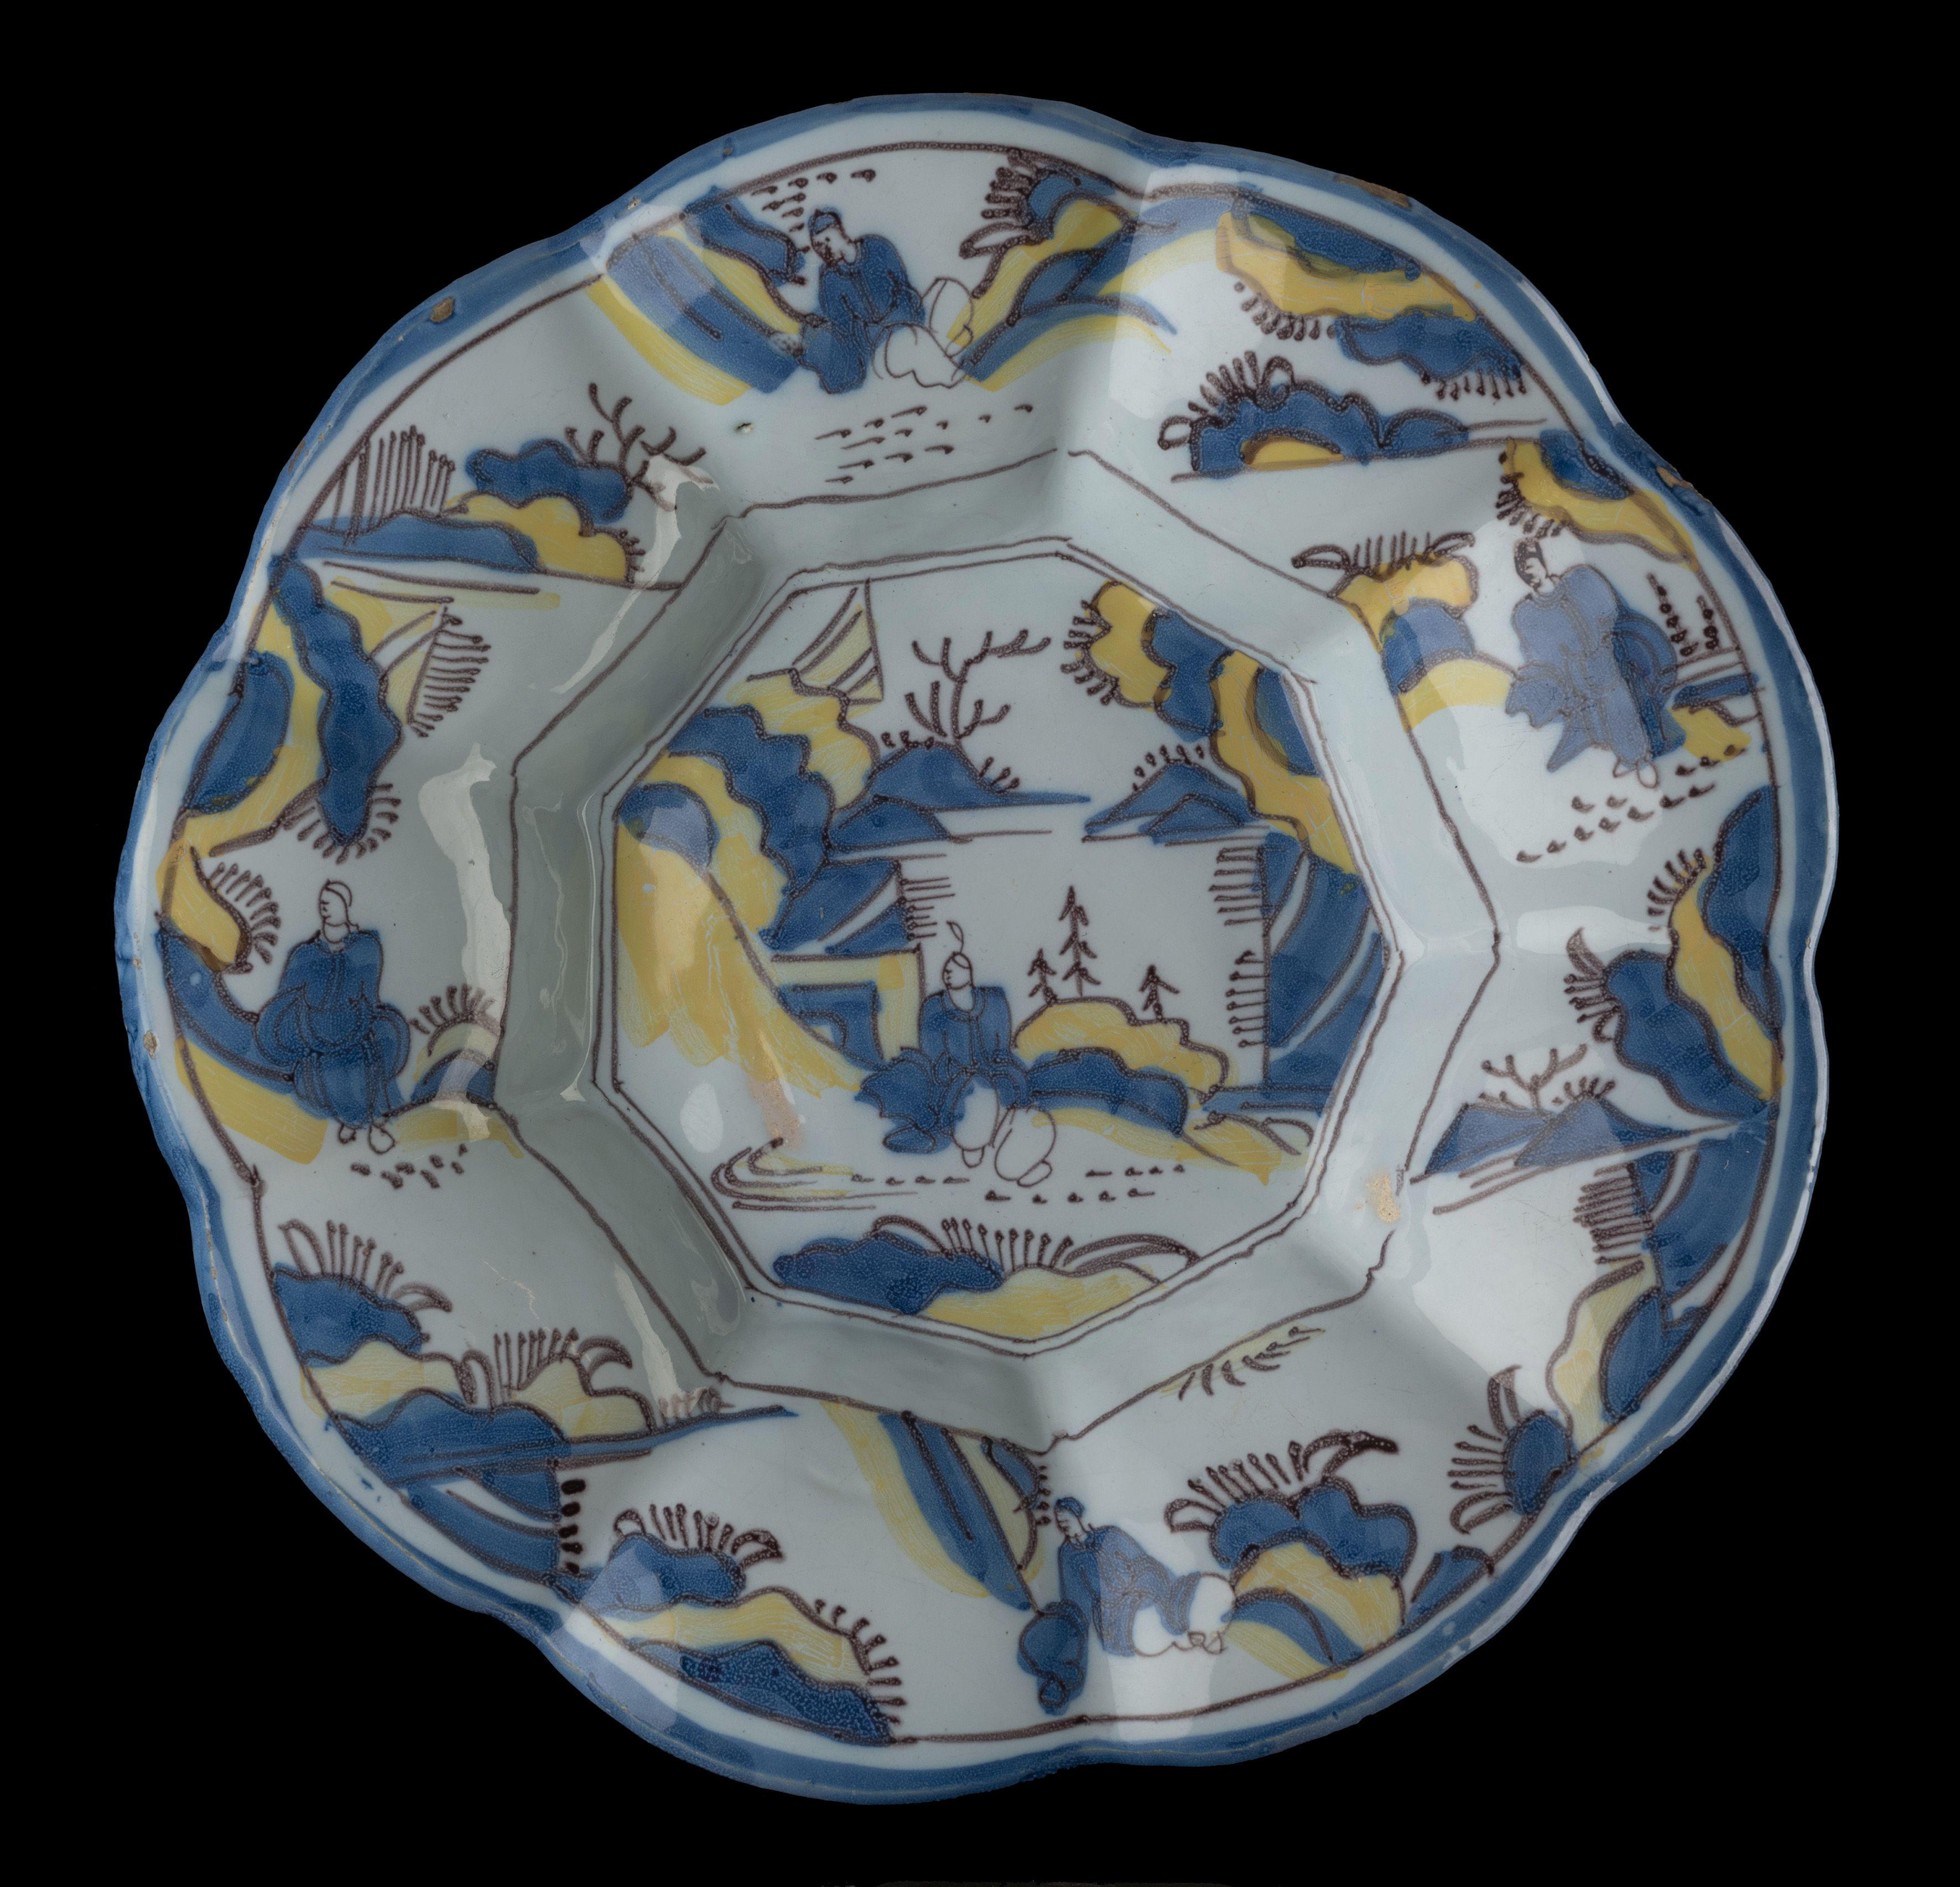 Chinoiserie lobed dish in blue, yellow and purple. Delft, 1680-1690
Dimensions: diameter 34 cm / 13.58 in. 

The lobed dish is composed of nine, wide lobes around a nine-fold centre and is painted in blue and yellow with a chinoiserie decor. A